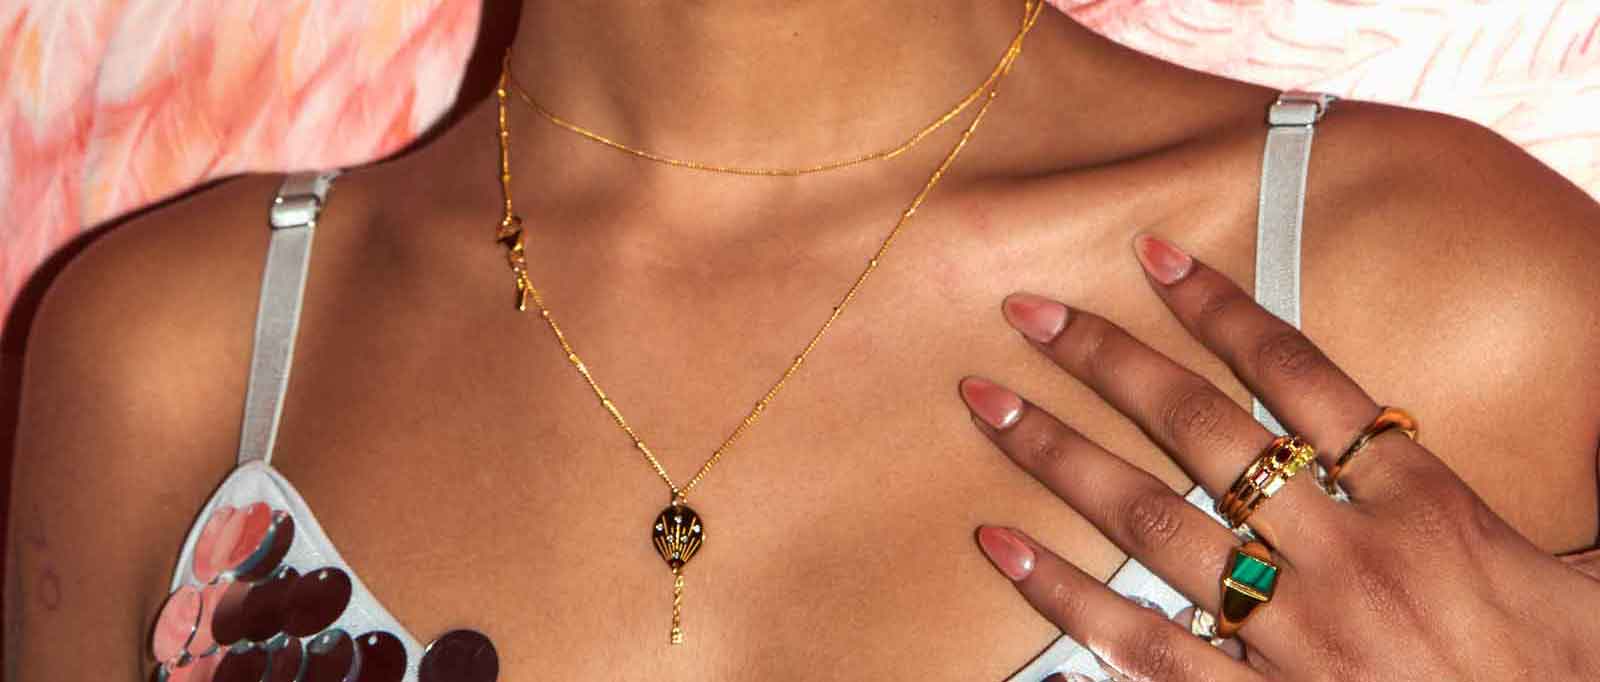 Attractive model wears ALASALWA Gold Vermeil Jewelry including post dangle earrings, gold vermeil necklace, and gold vermeil rings with stones.